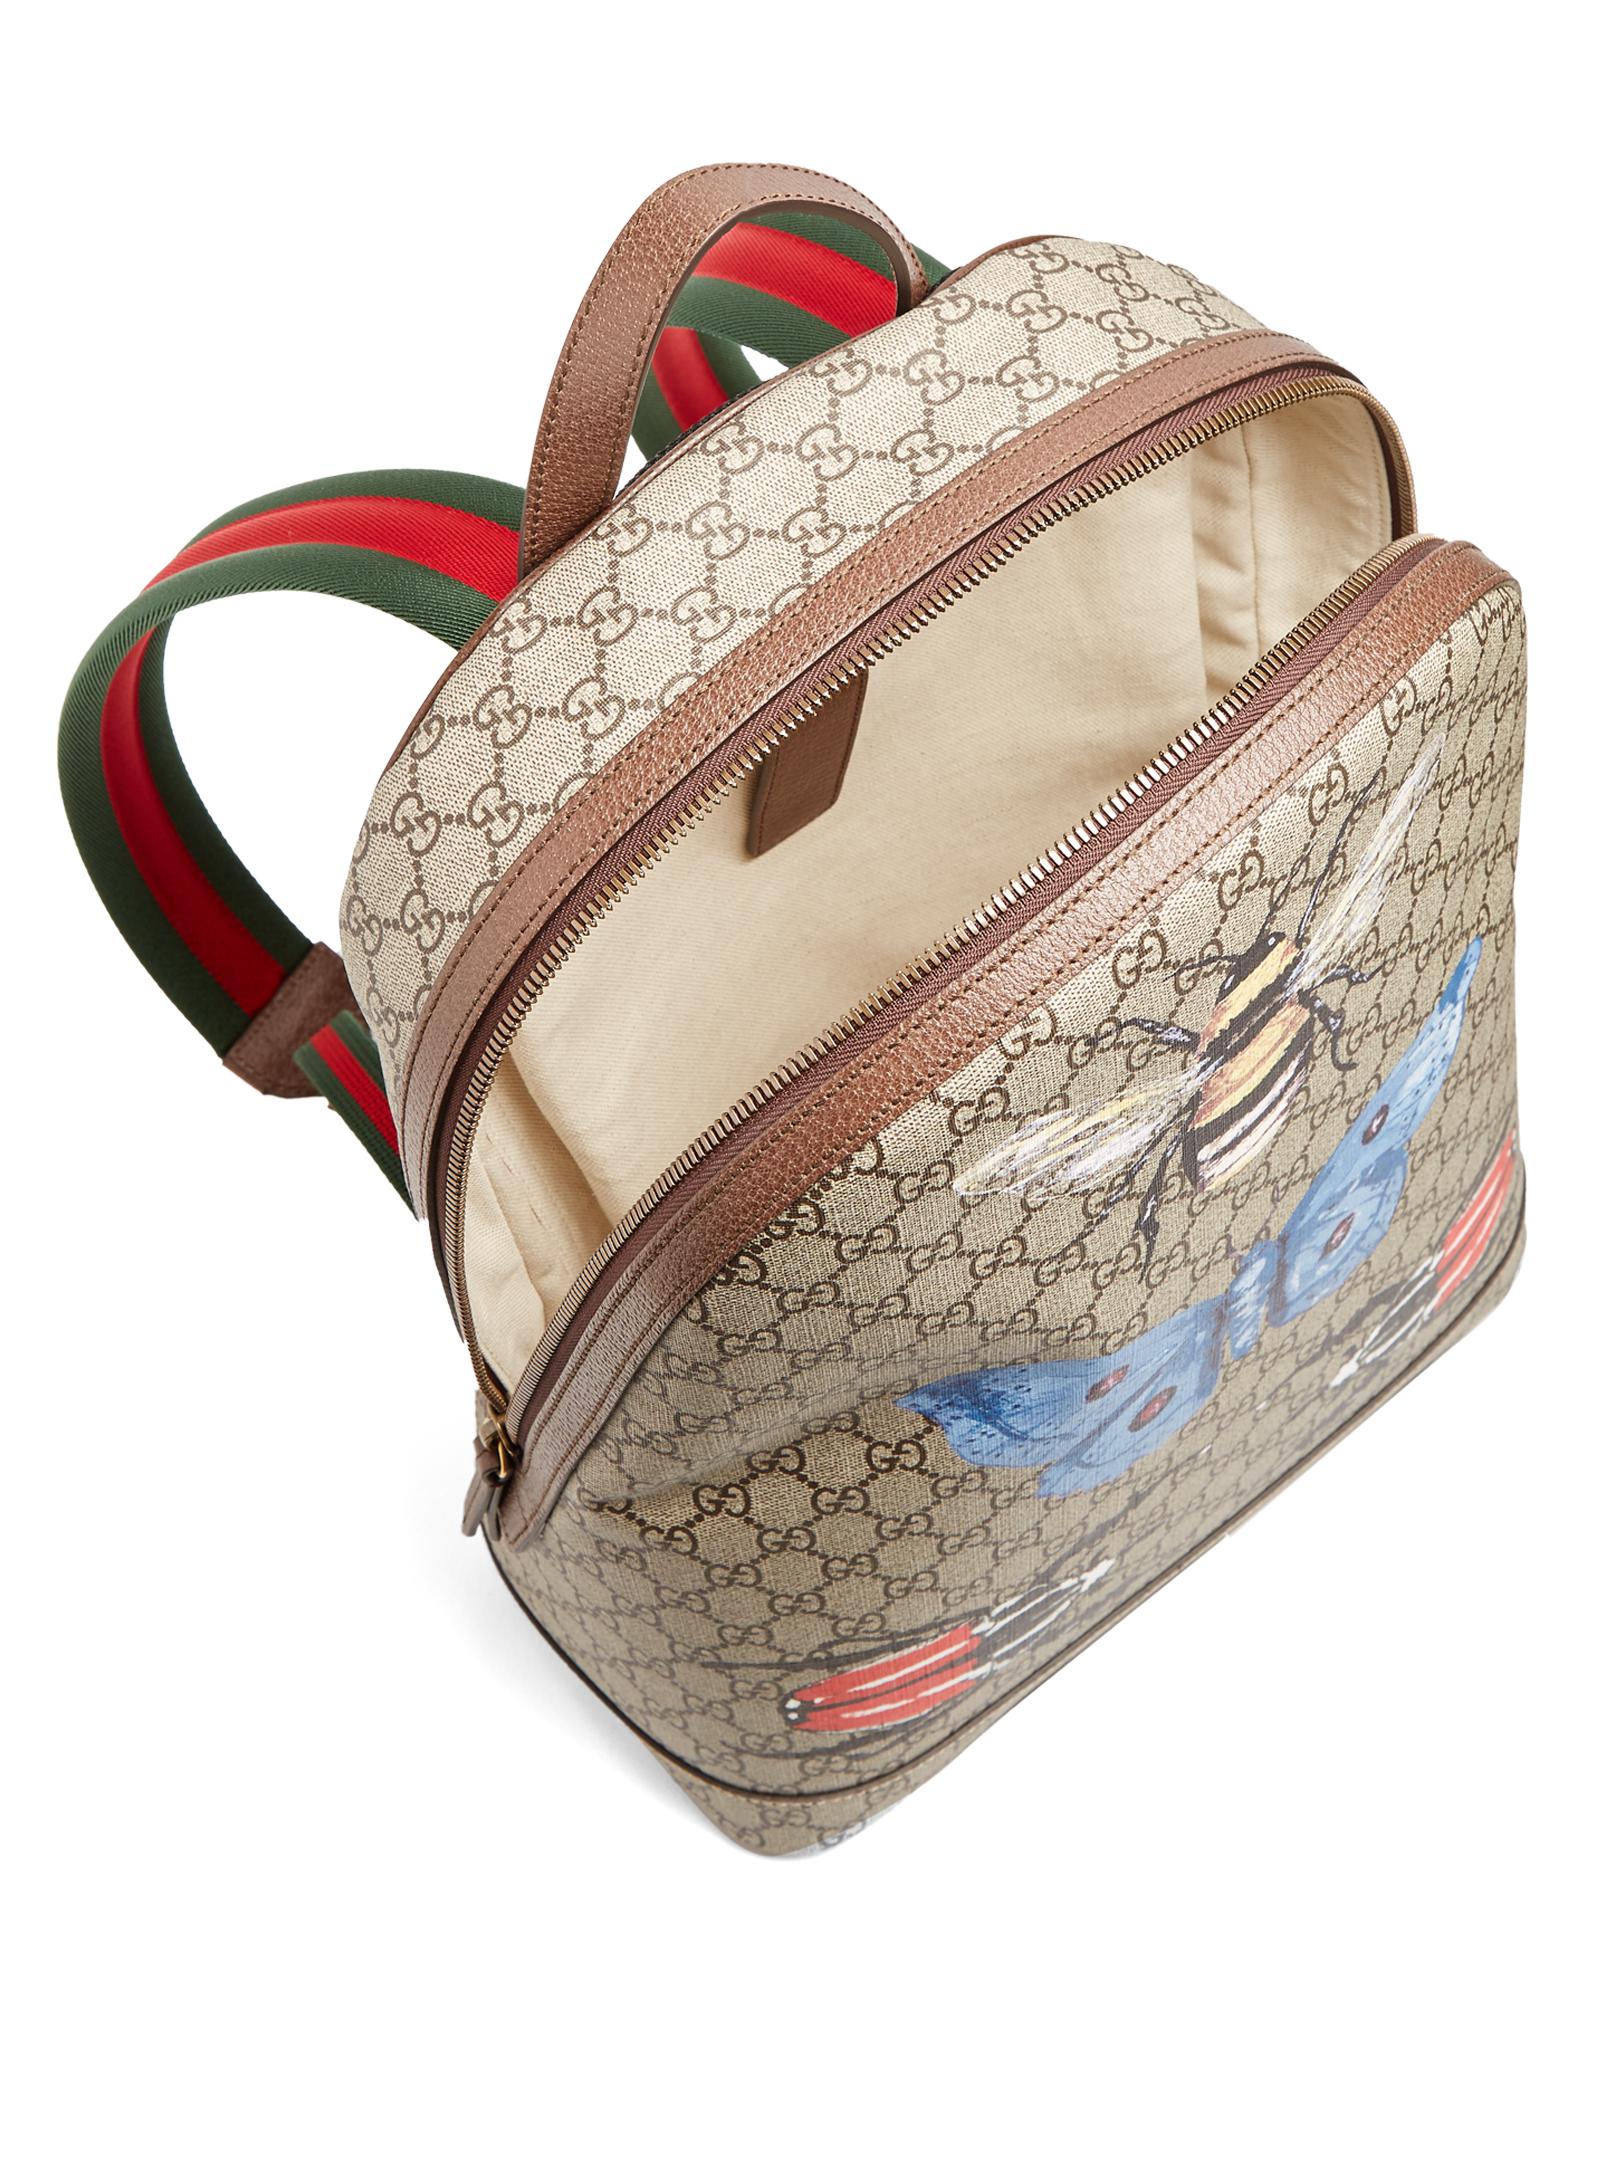 Gucci Gg Supreme Insect-print Canvas Backpack in Brown for Men - Lyst